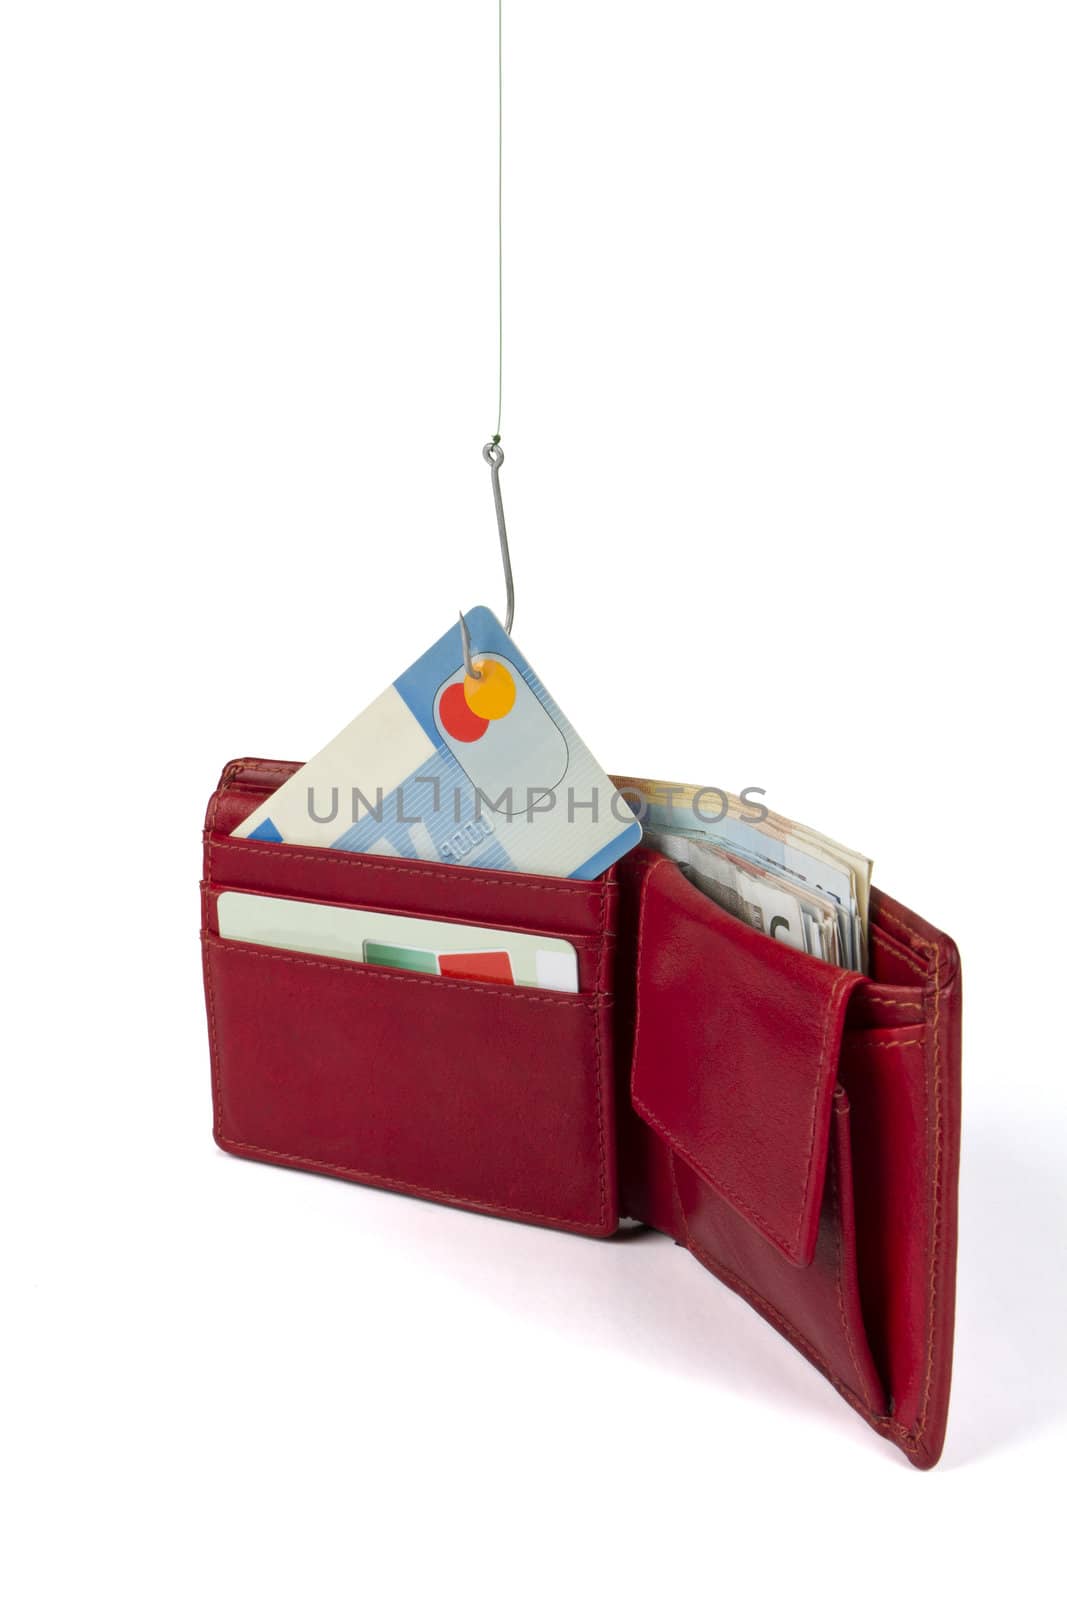 stealing credit card out of wallet -  isolated on white background